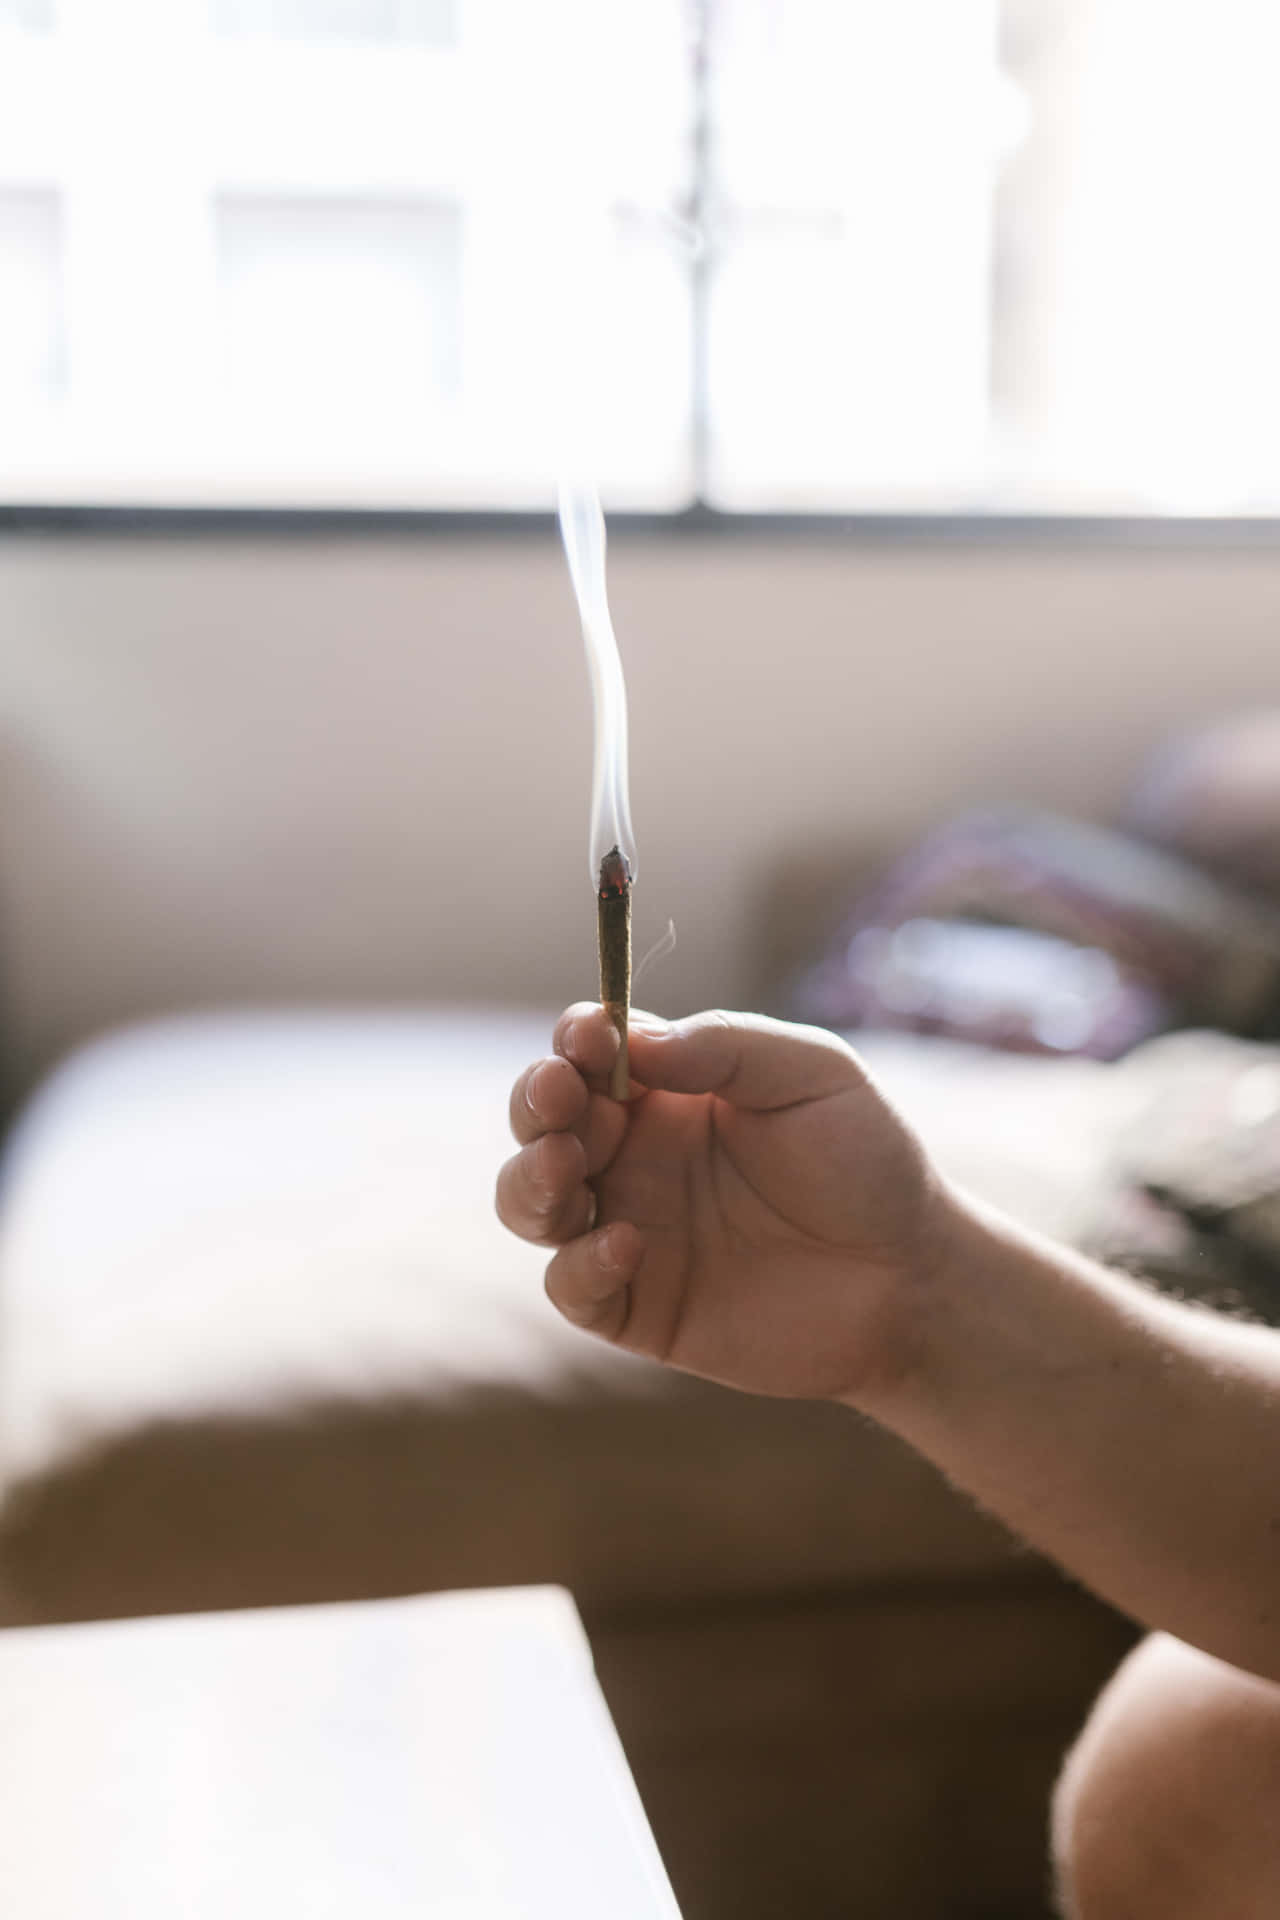 A hand holds a freshly lit weed blunt, smoke slowly curling around it. Wallpaper